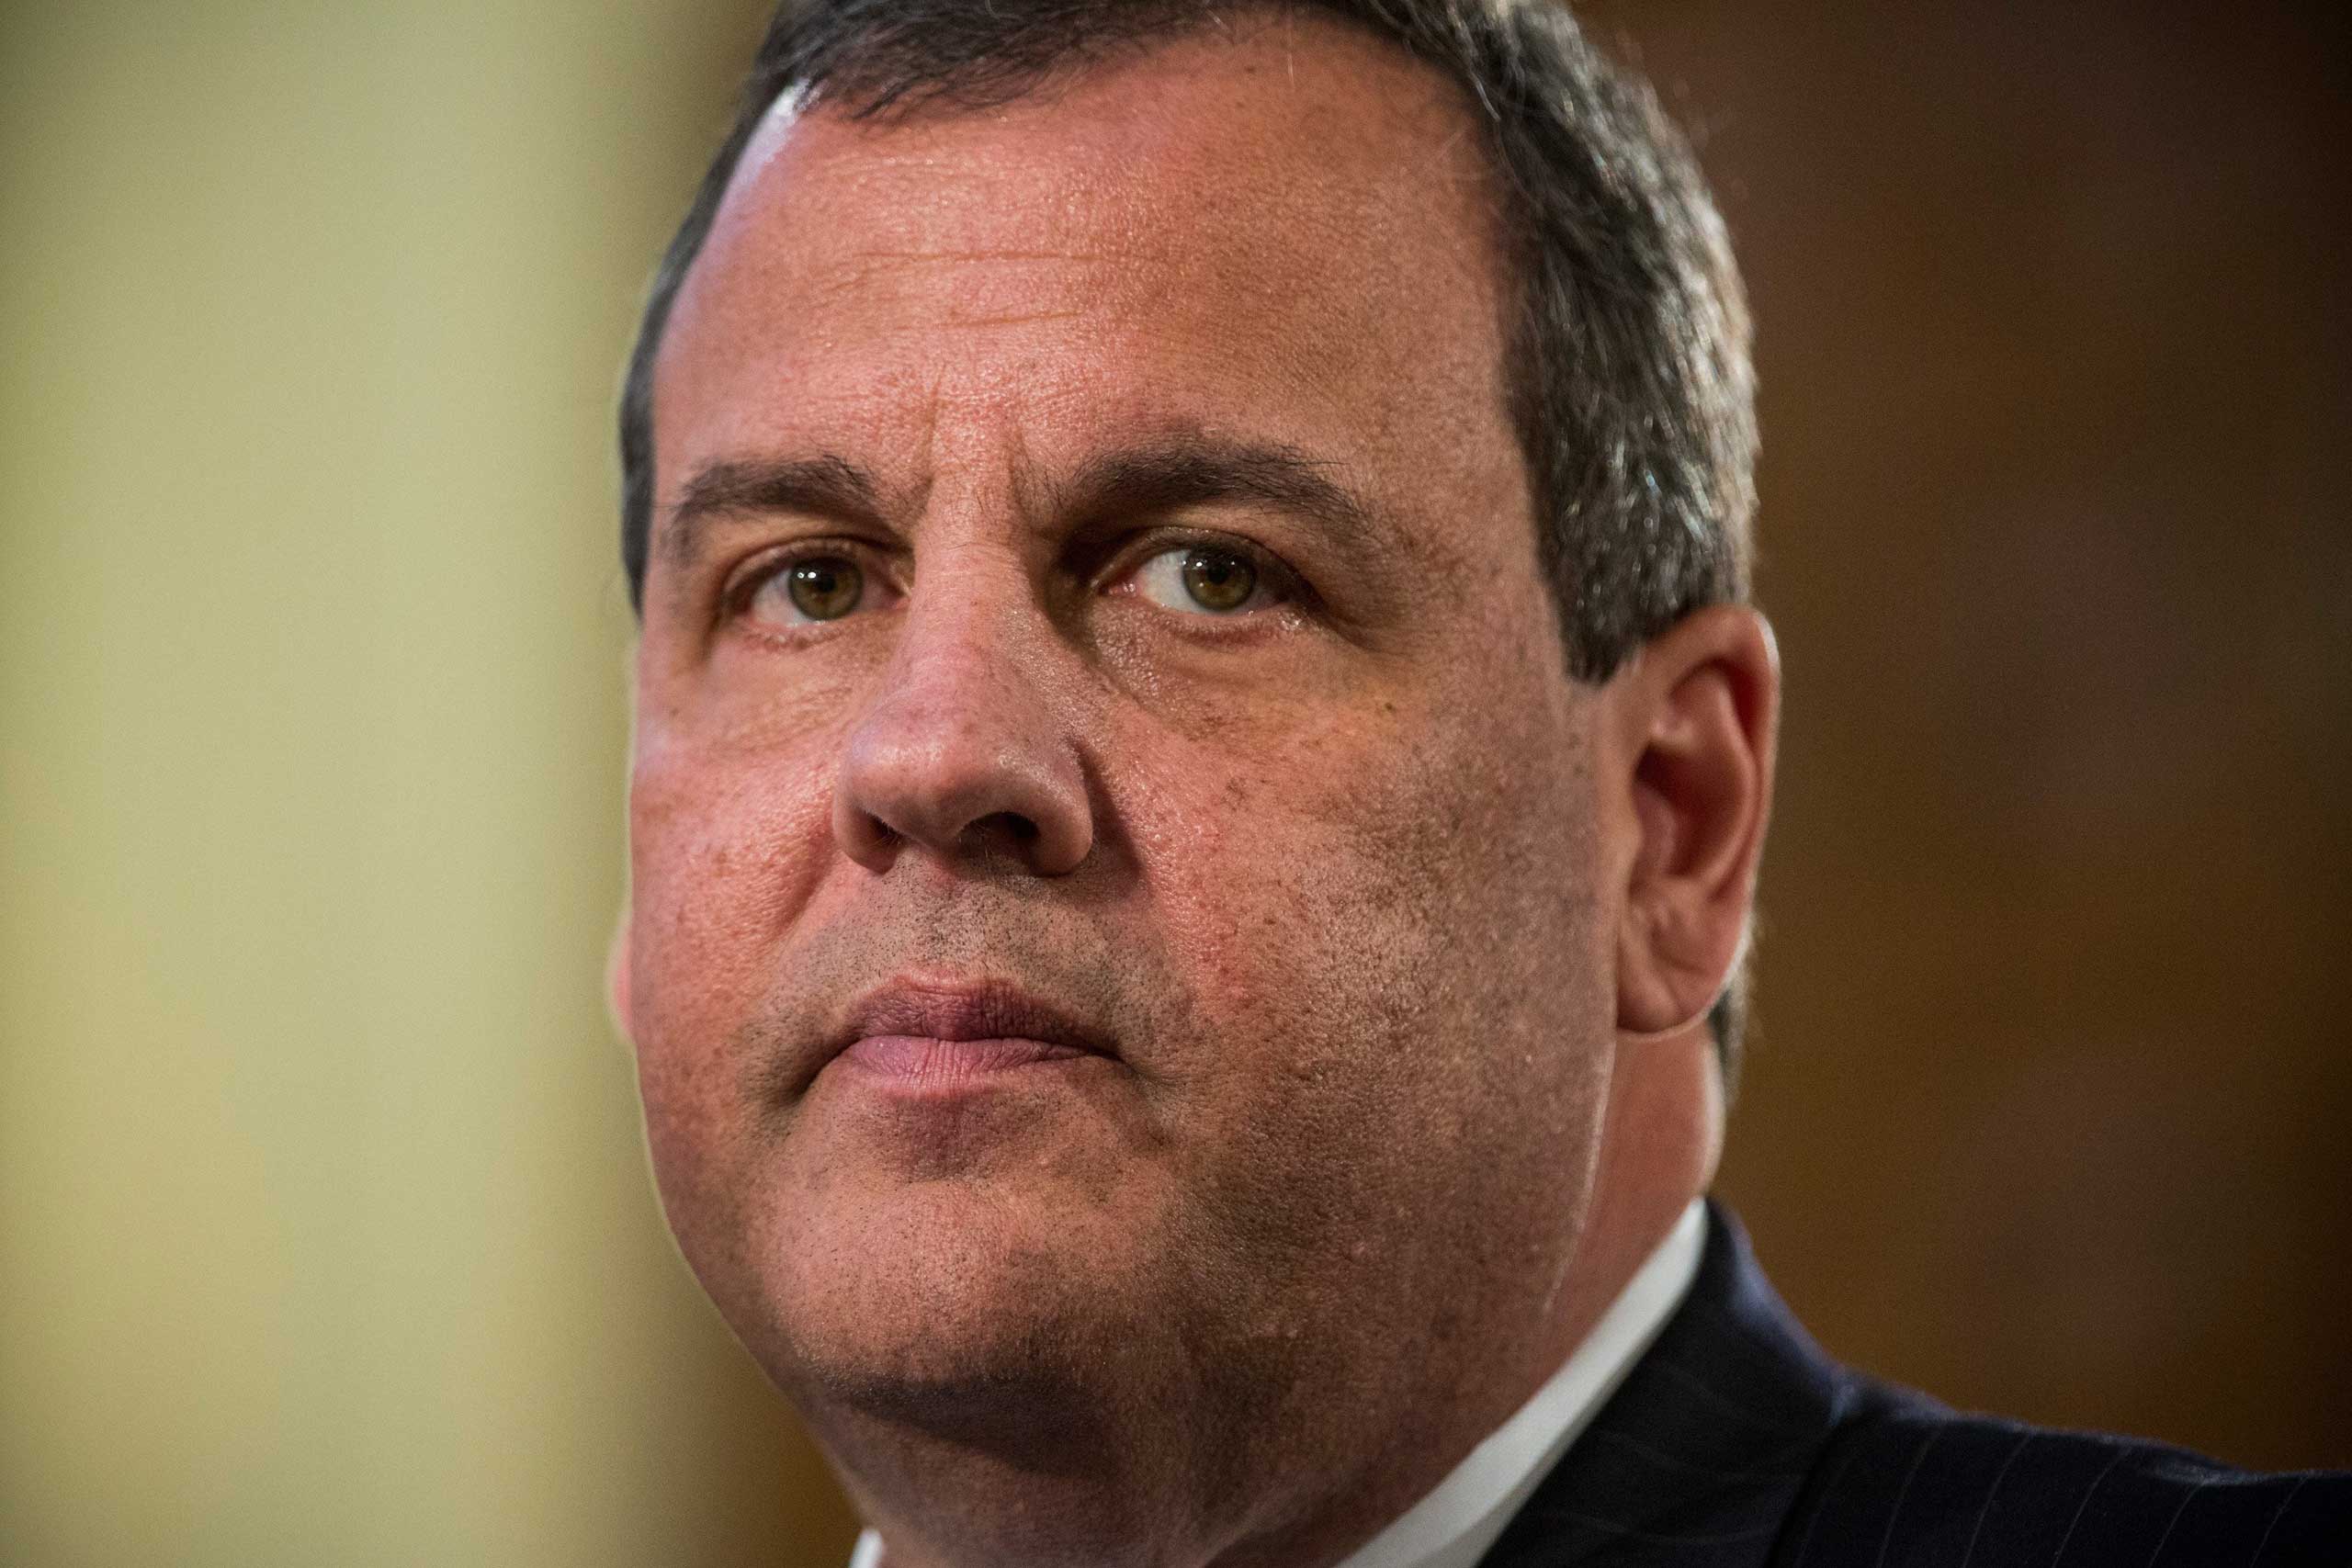 New Jersey Governor Chris Christie during his State of the State address on Jan. 13, 2015 in Trenton, New Jersey. (Andrew Burton—Getty Images)